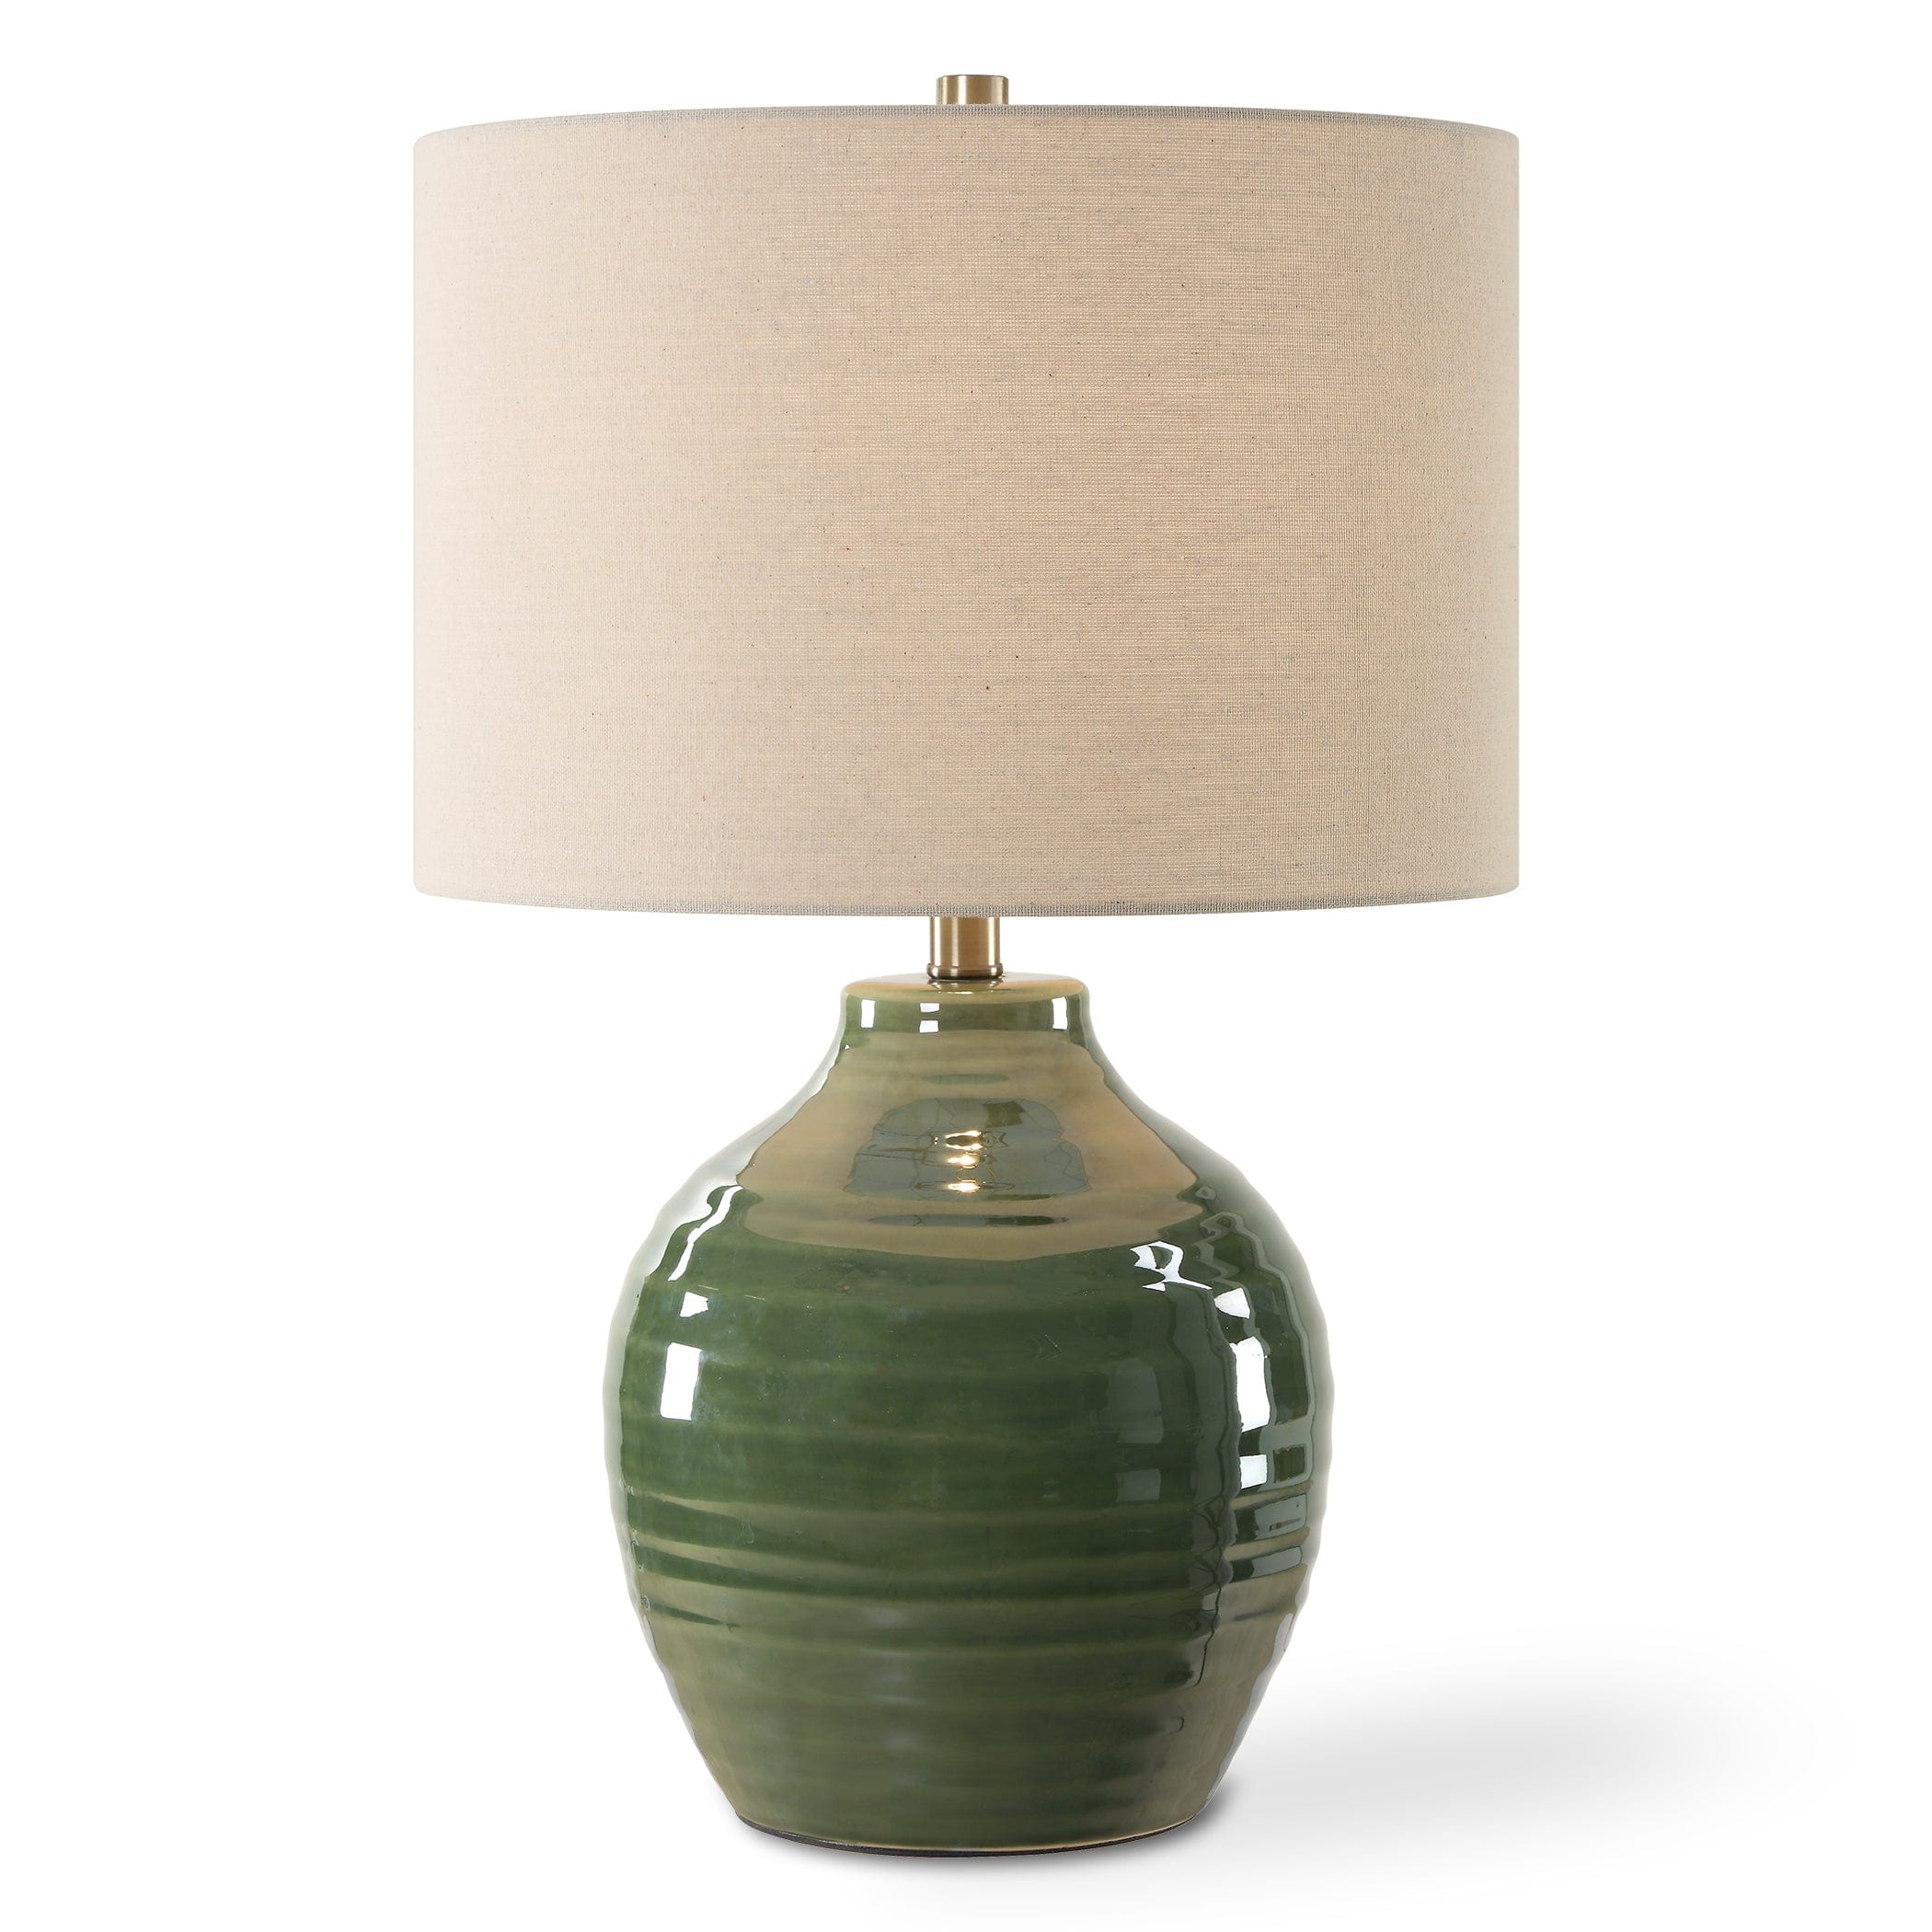 TABLE LAMP WL-21 Uttermost